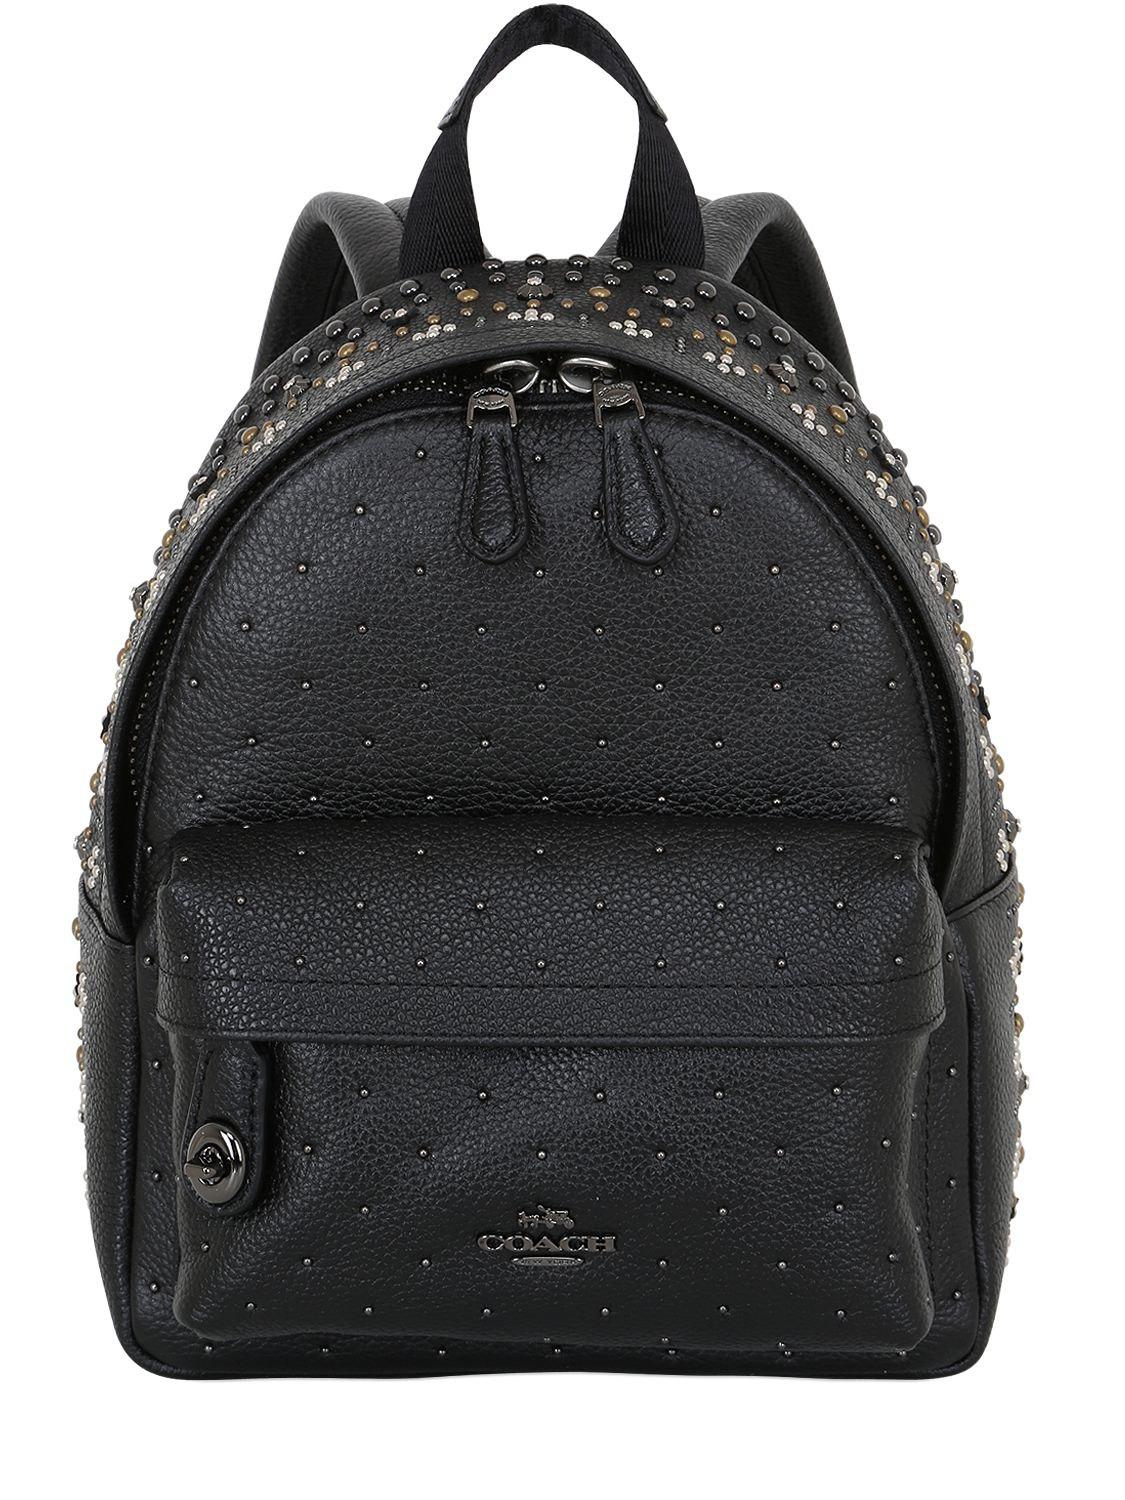 COACH Studded Leather Backpack in Black - Lyst